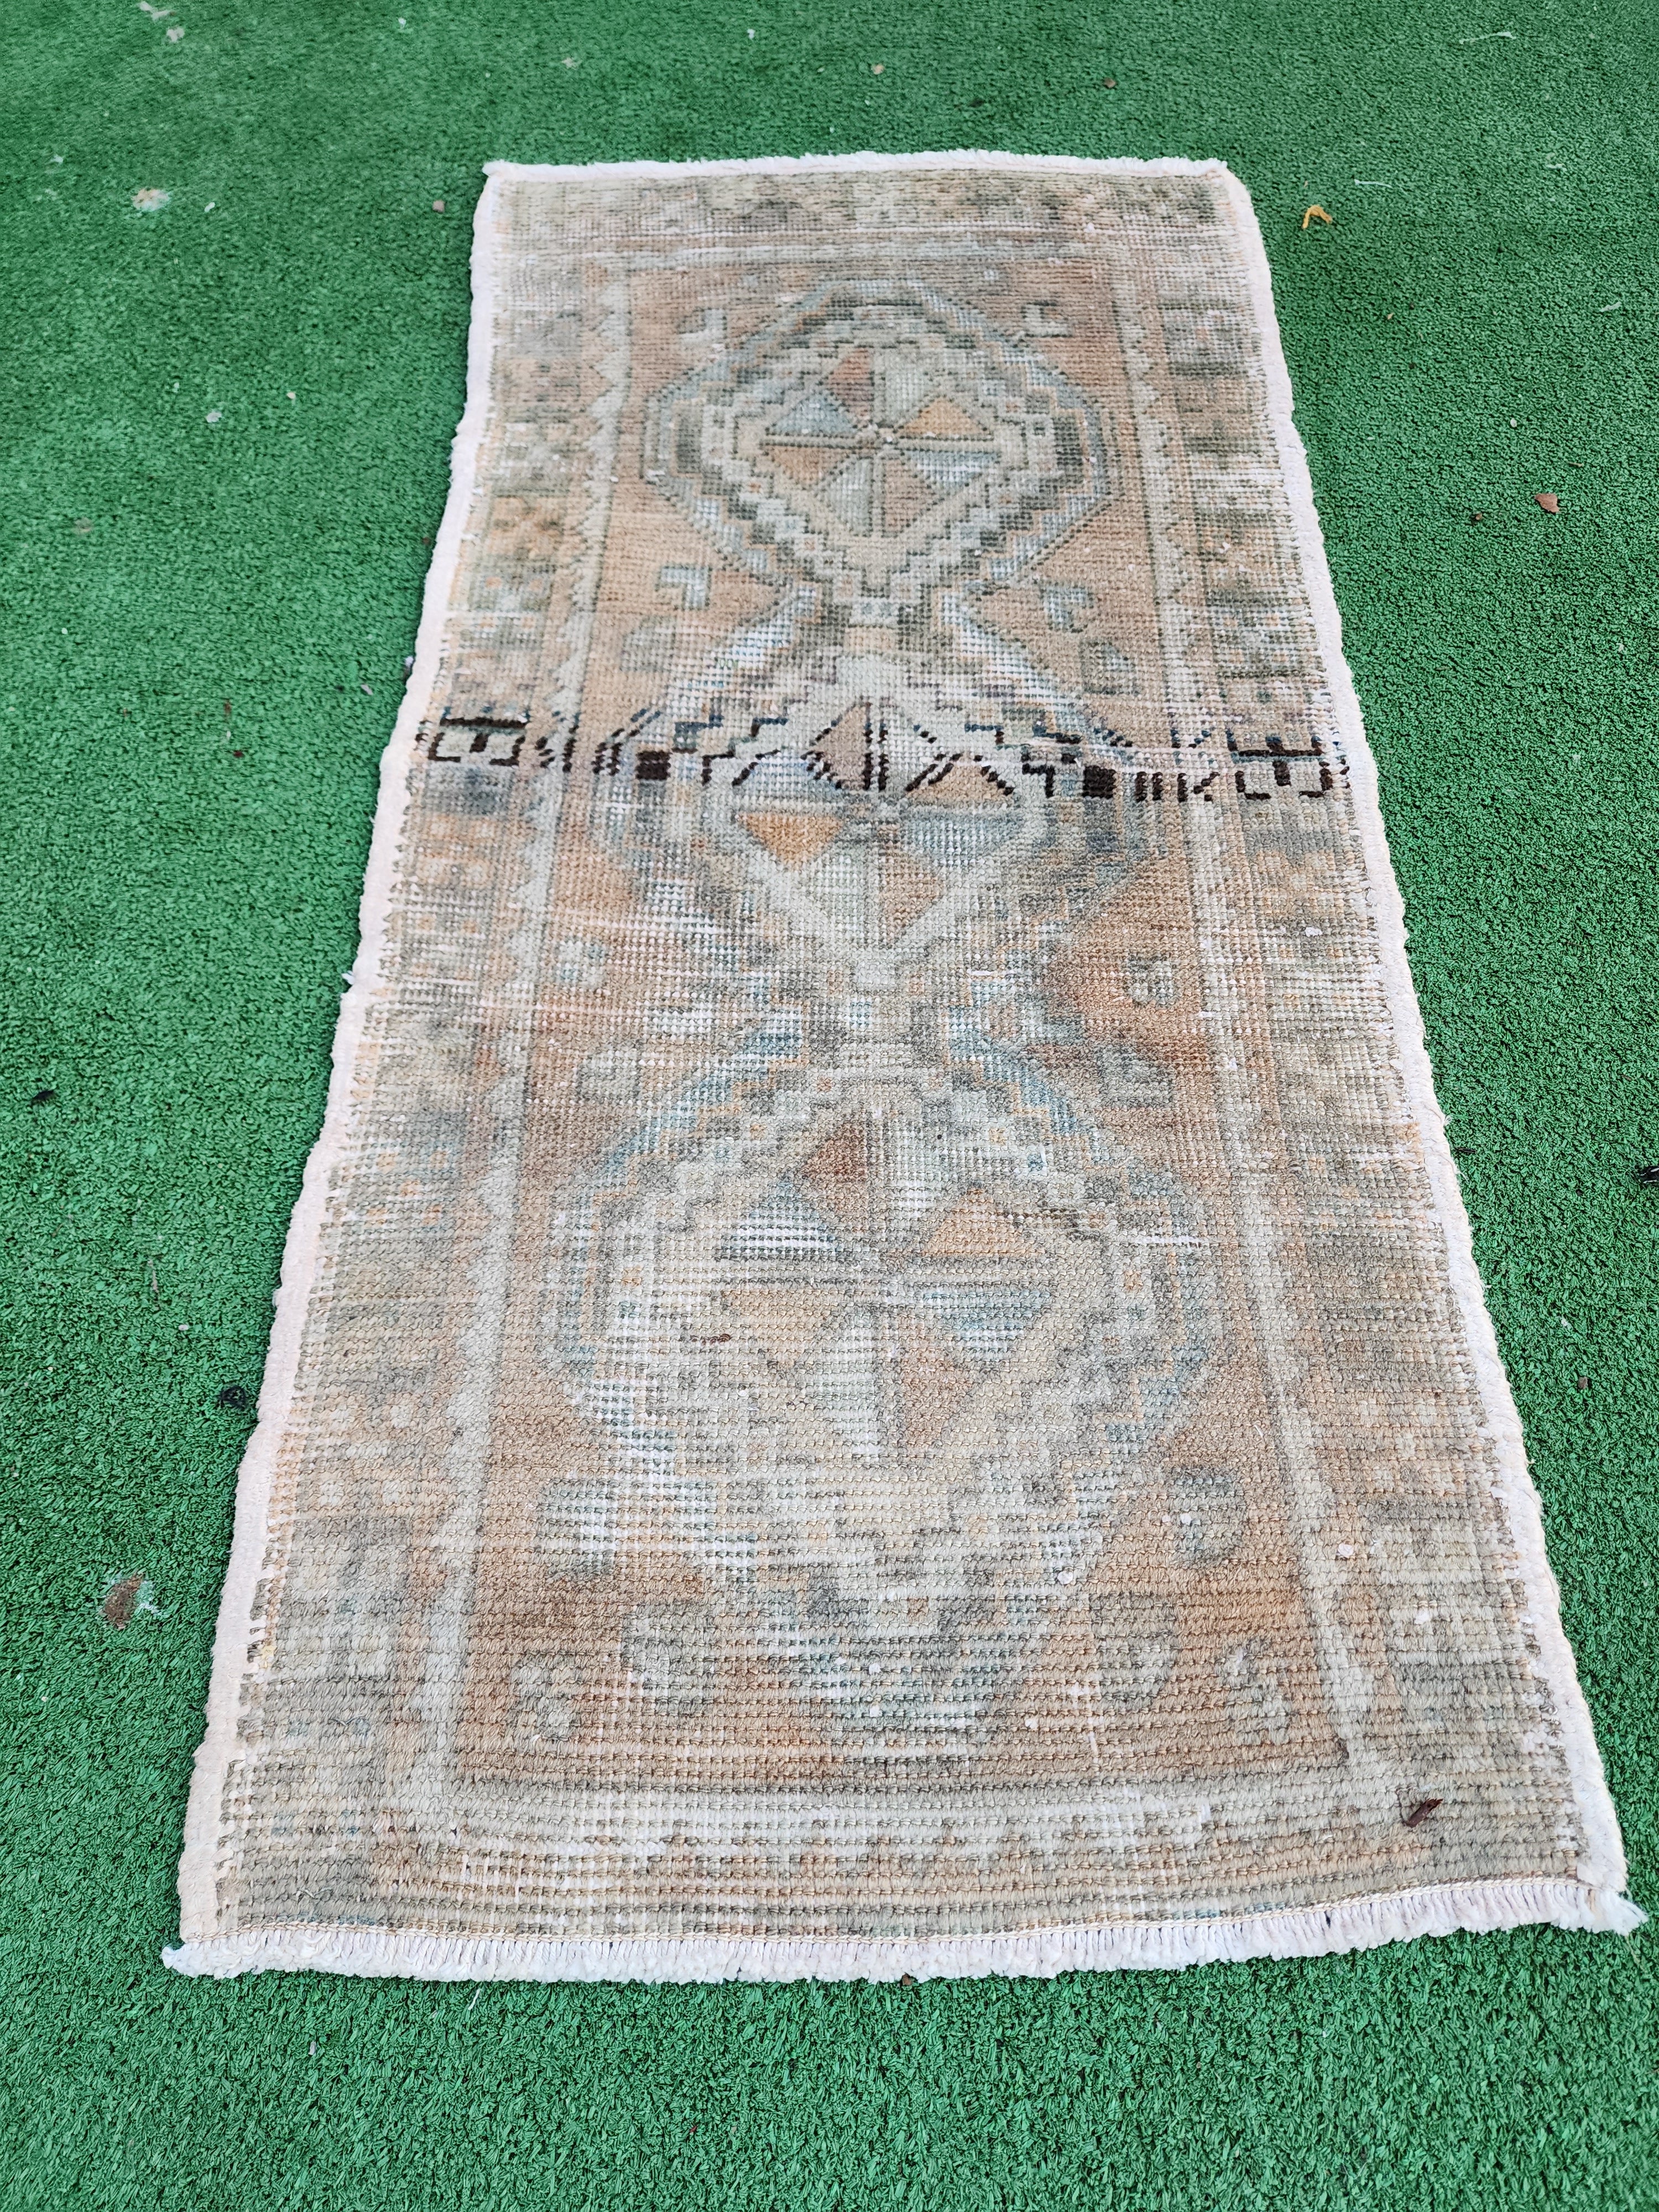 Vintage Turkish Small Rug, 3 ft 1 in x 1 ft 5 in,  Pink, Grey and Beige Faded Distressed Antique Style Mat